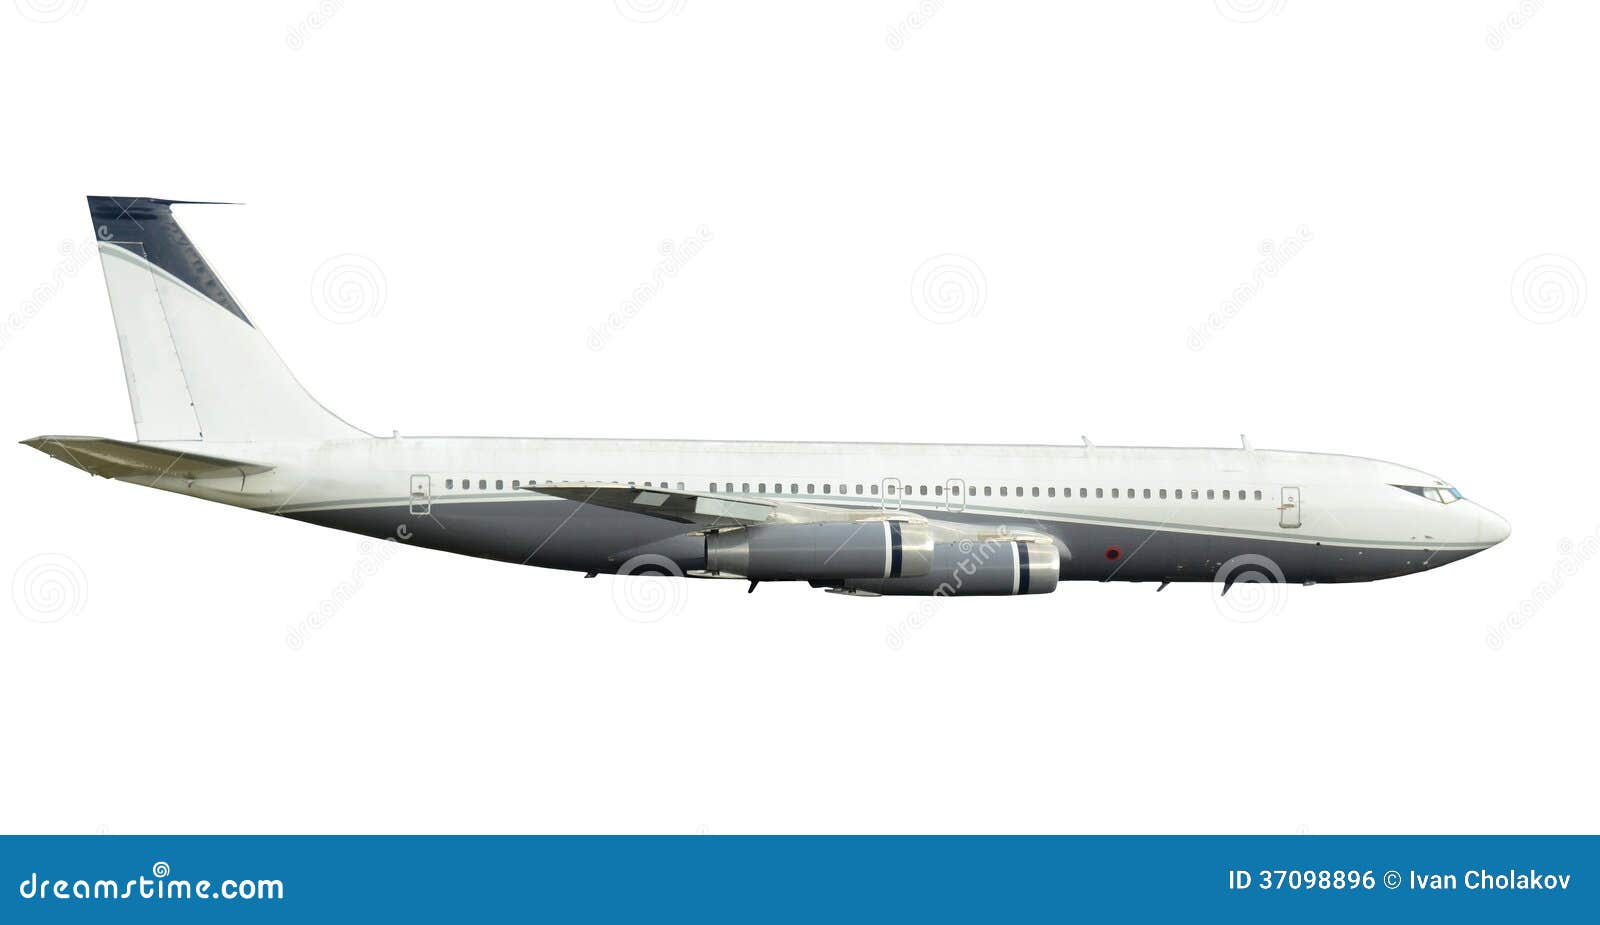 Classic Jet Airplane Isolated Side View Stock Photo - Image: 37098896